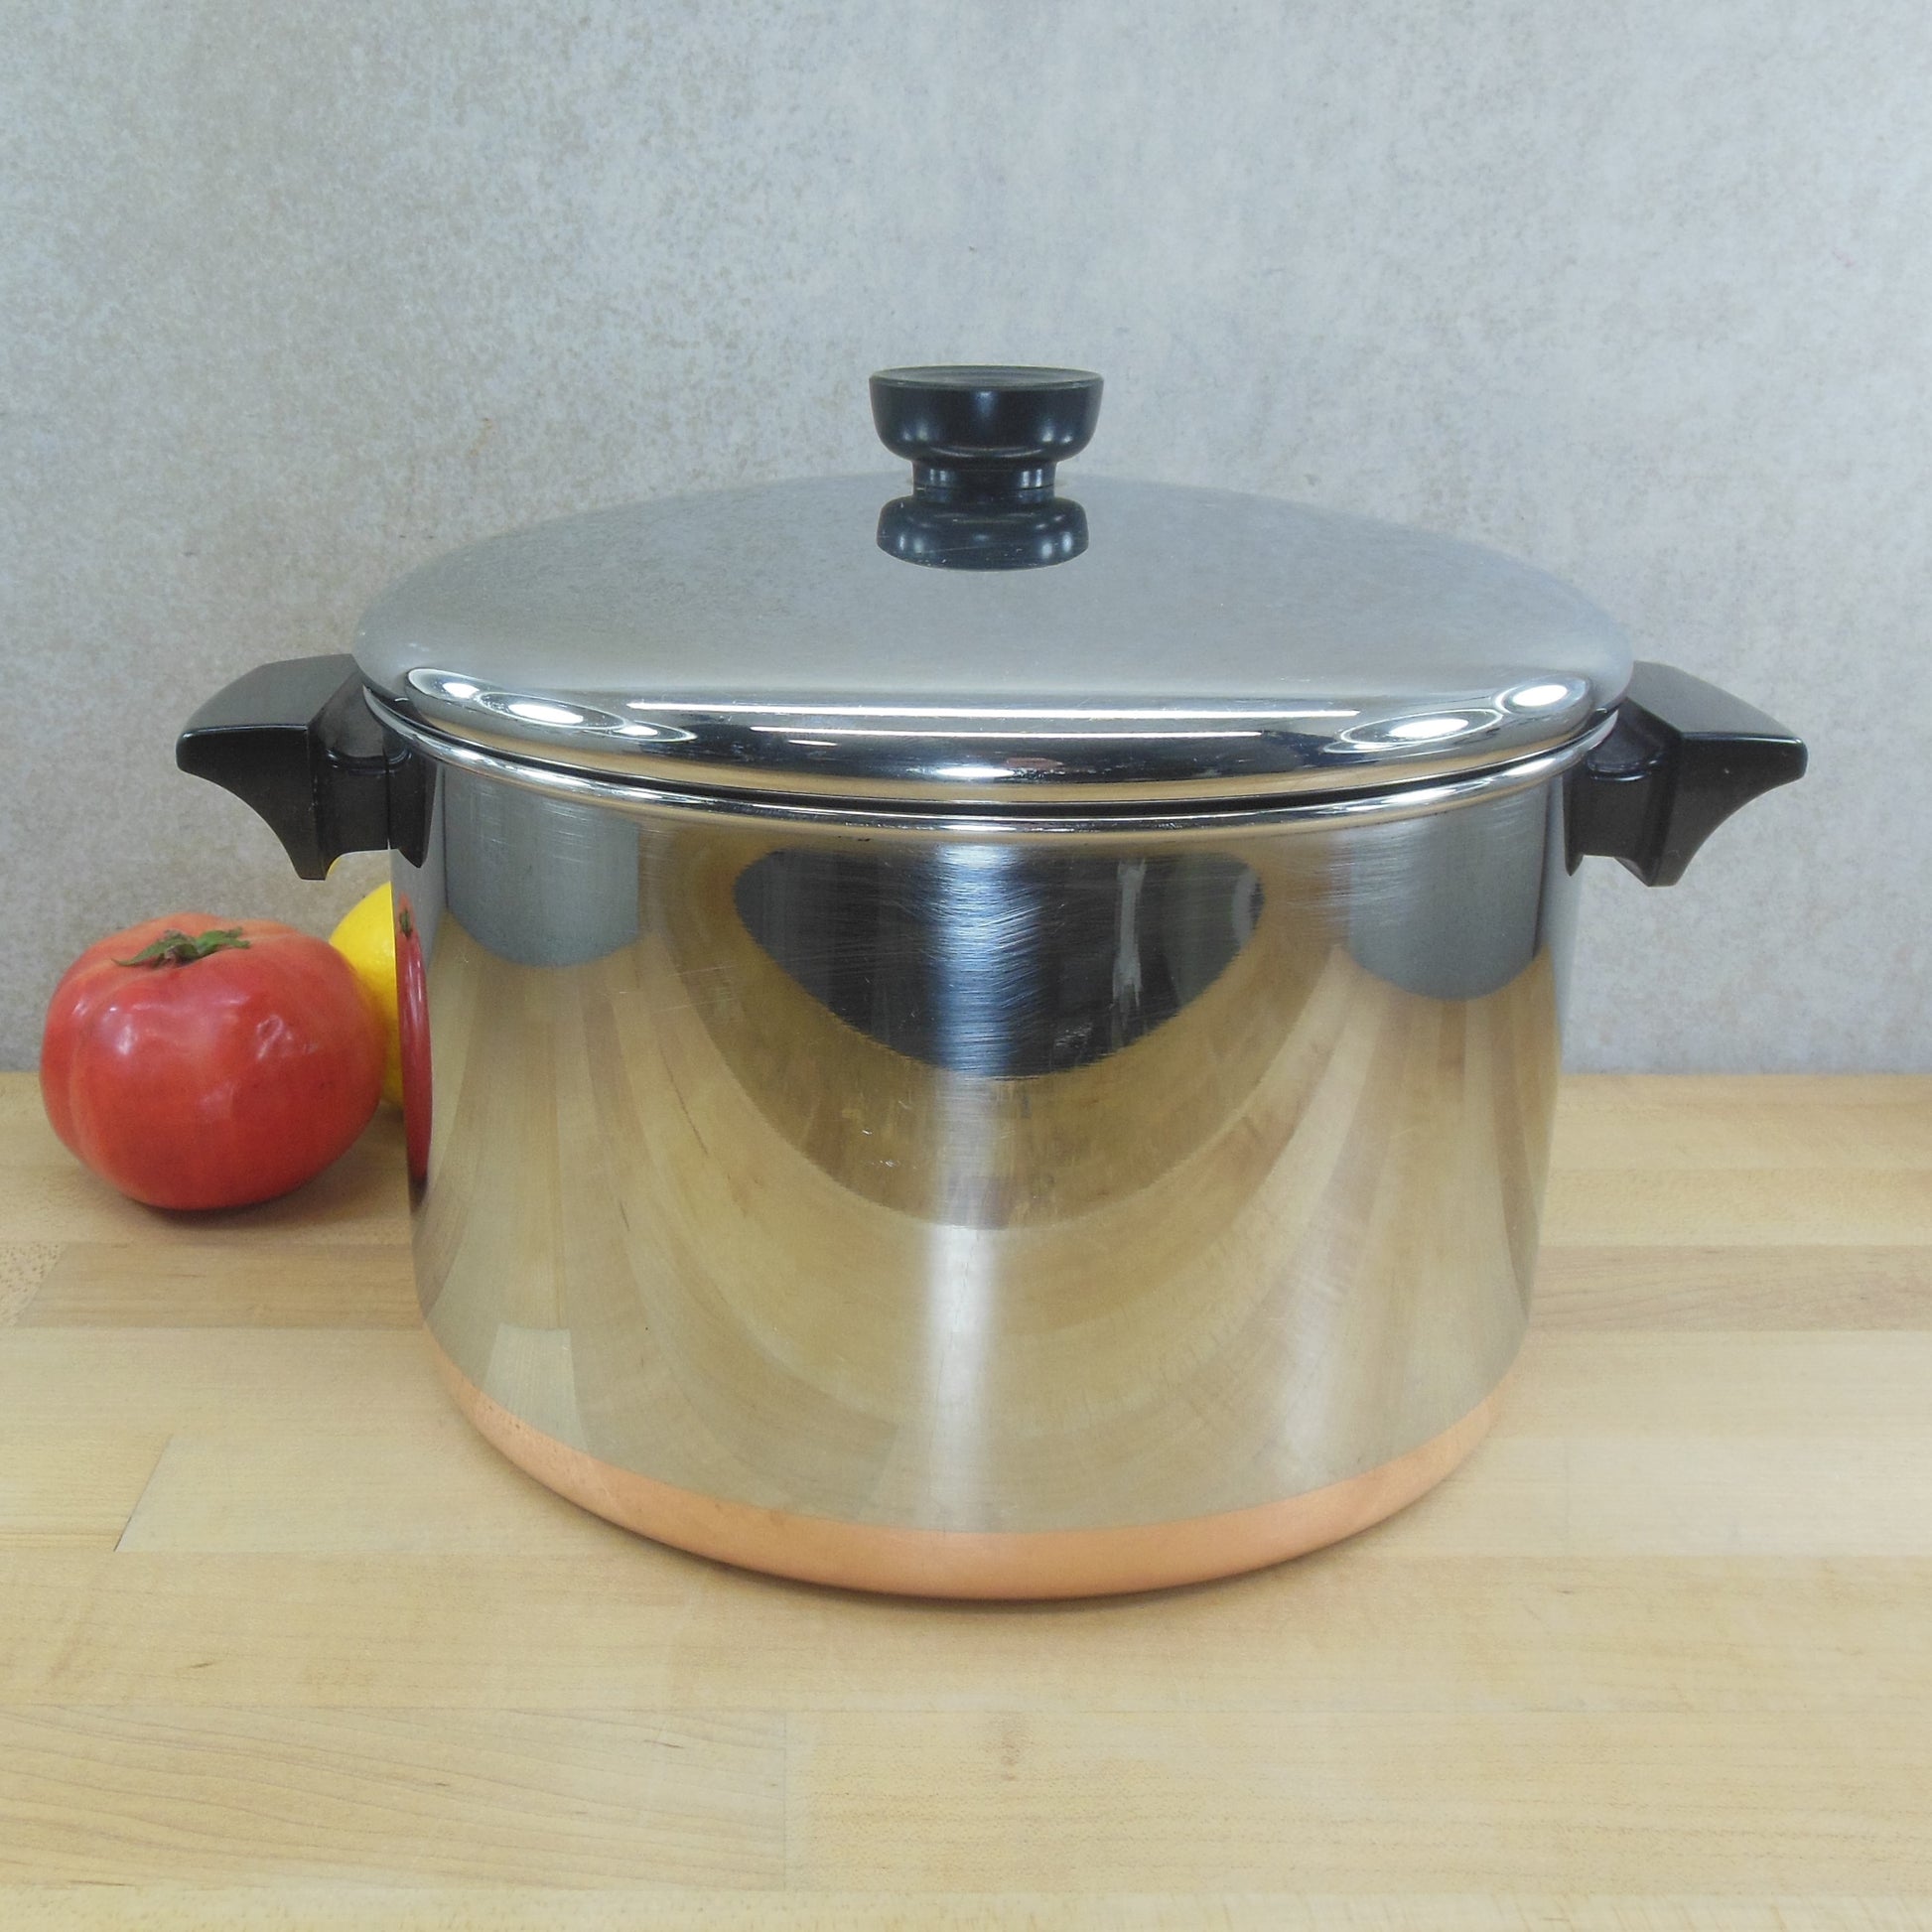 The McGuire Group LLC - Auction: Online Estate Auction - Nov. 8-14, 2019  ITEM: Household: Kitchen: Nice set of Revere Ware Copper Bottom Cooking Pots  and Pans w/lids